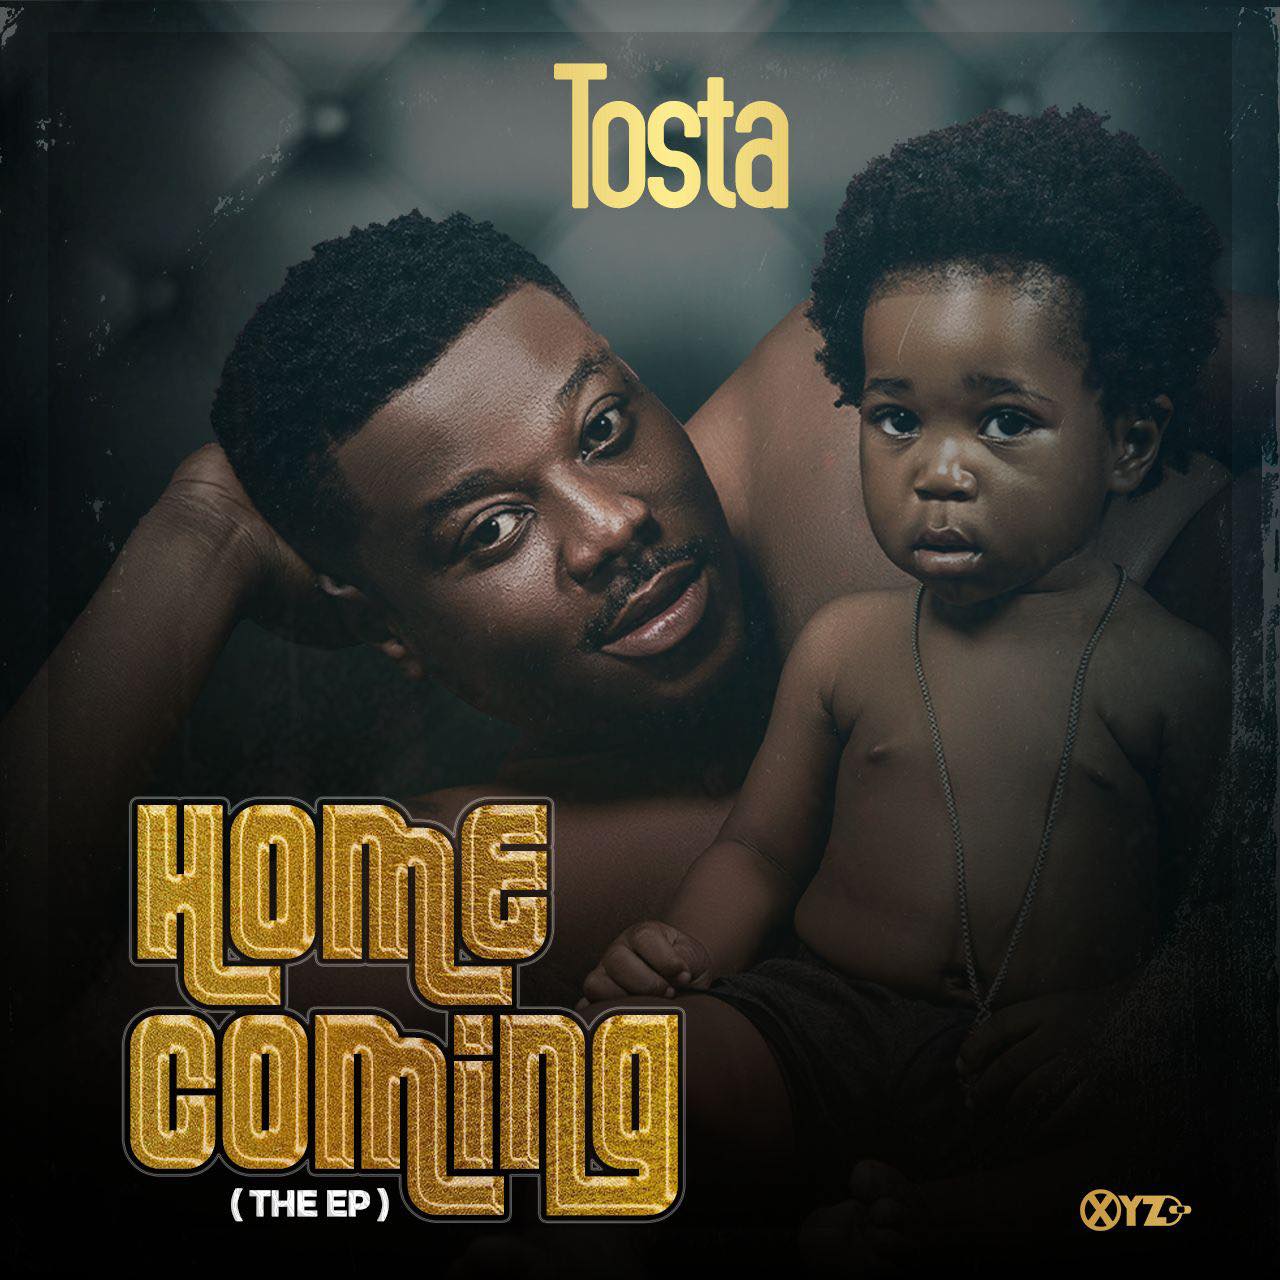 Tosta - Homecoming (Full EP)